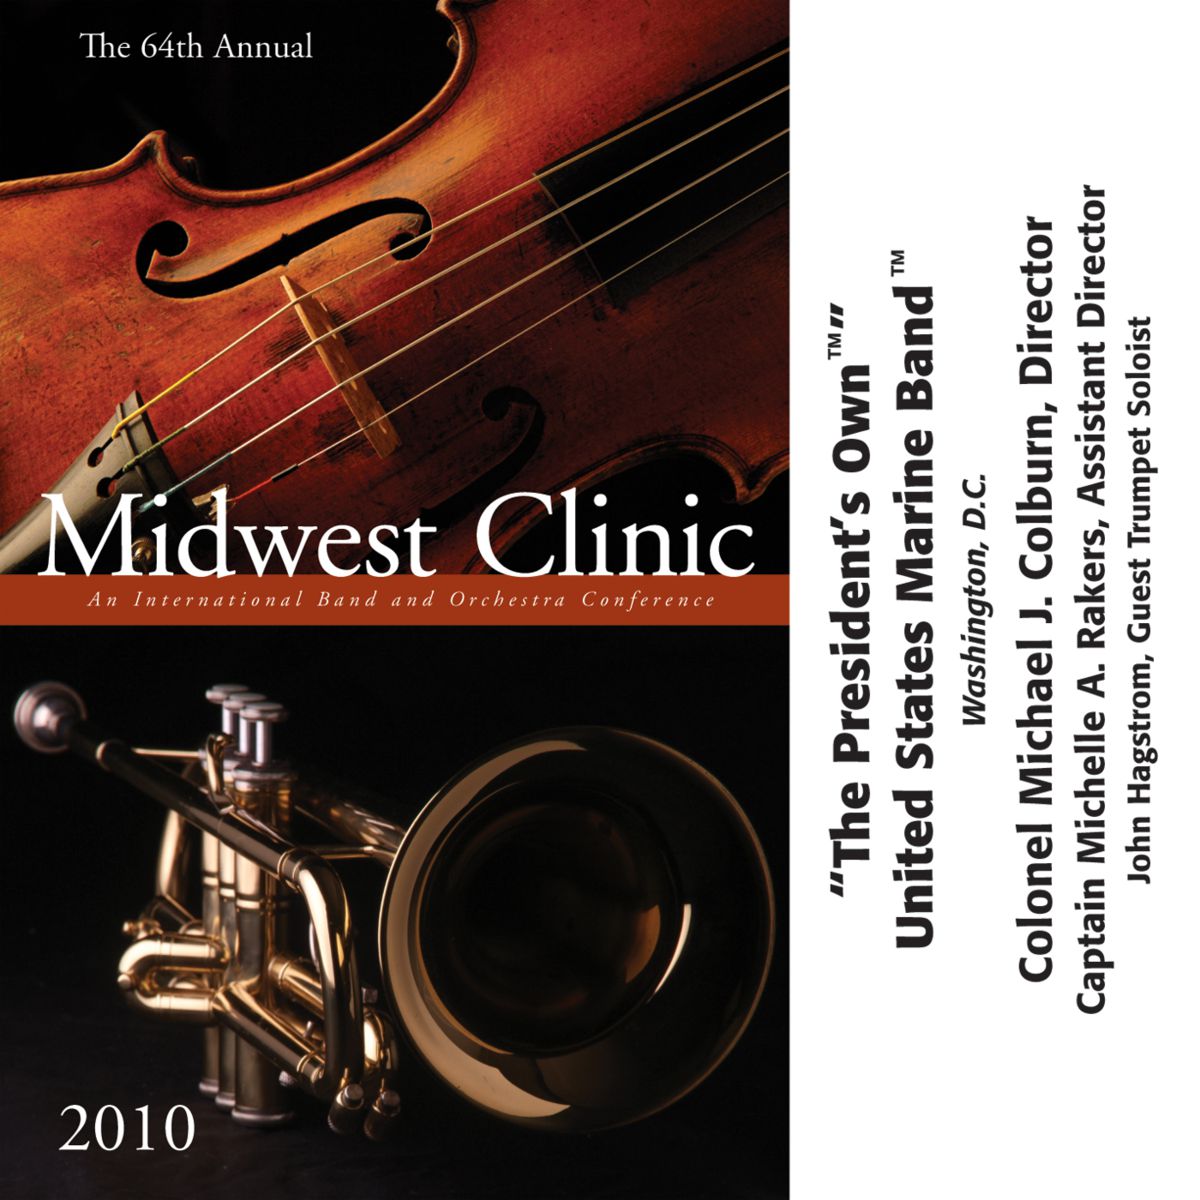 2010 Midwest Clinic: "The President's Own" United States Marine Band - hacer clic aqu